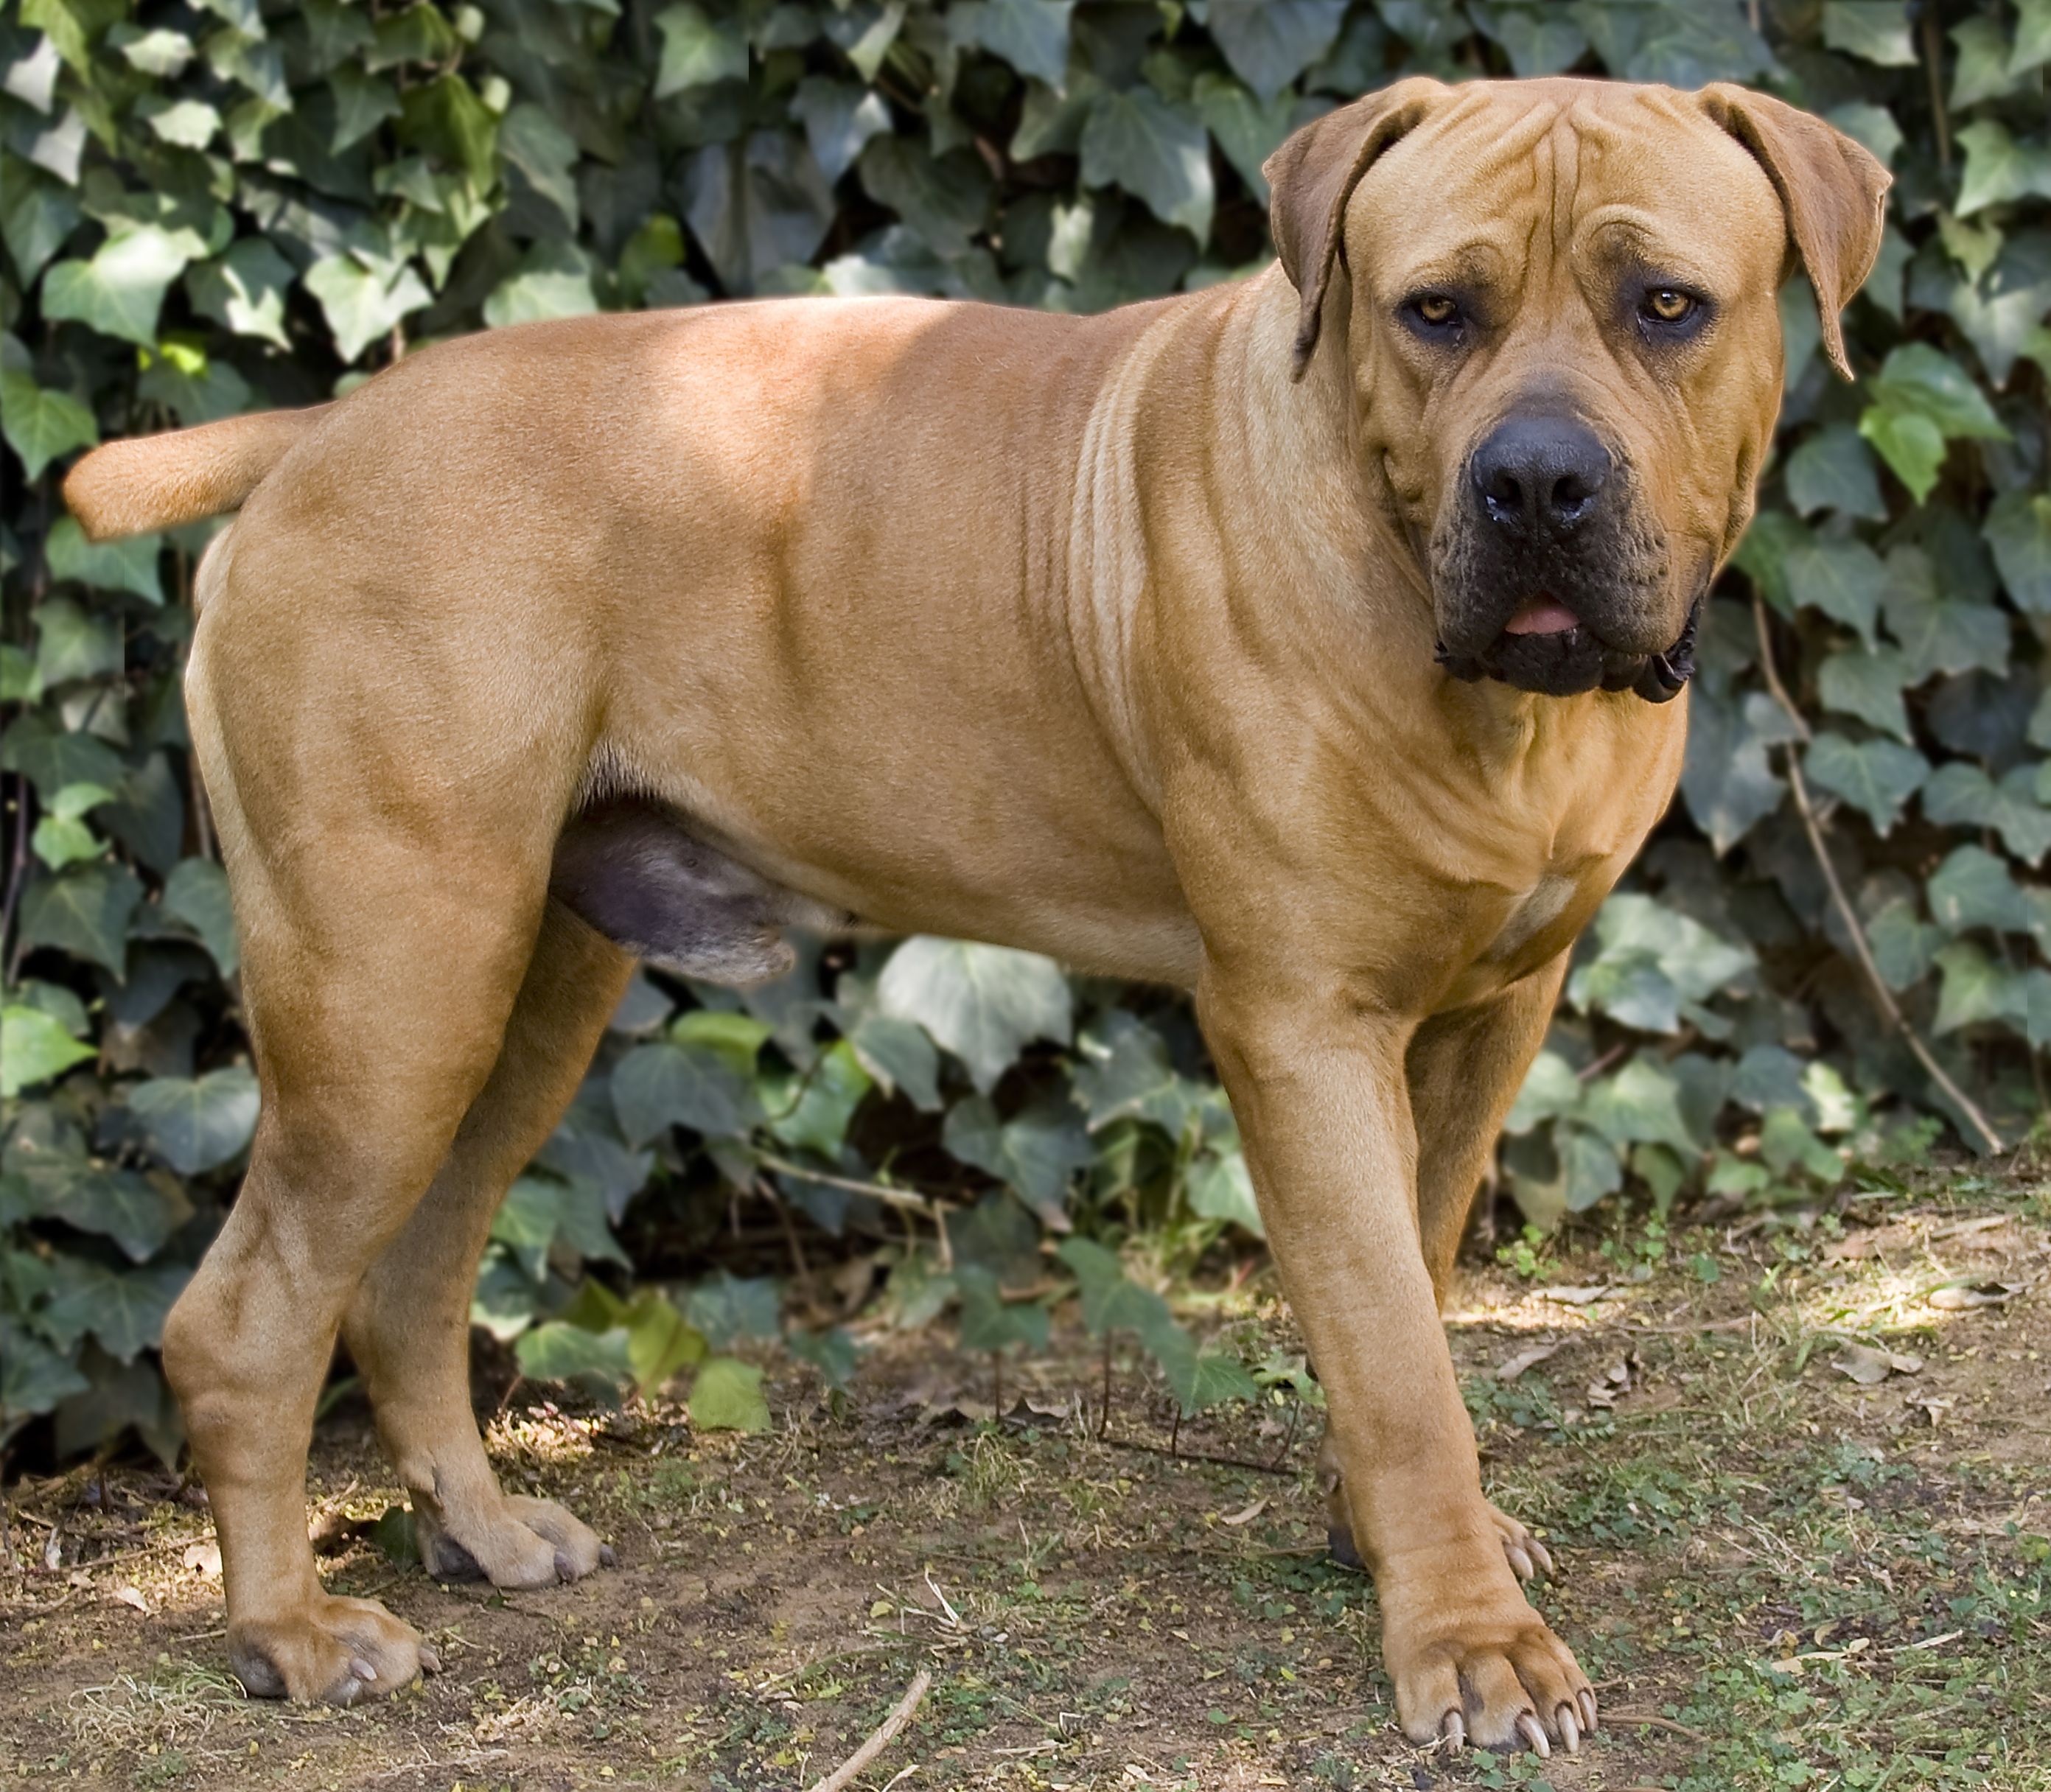 28 Of The Biggest Dog Breeds In The World | lupon.gov.ph